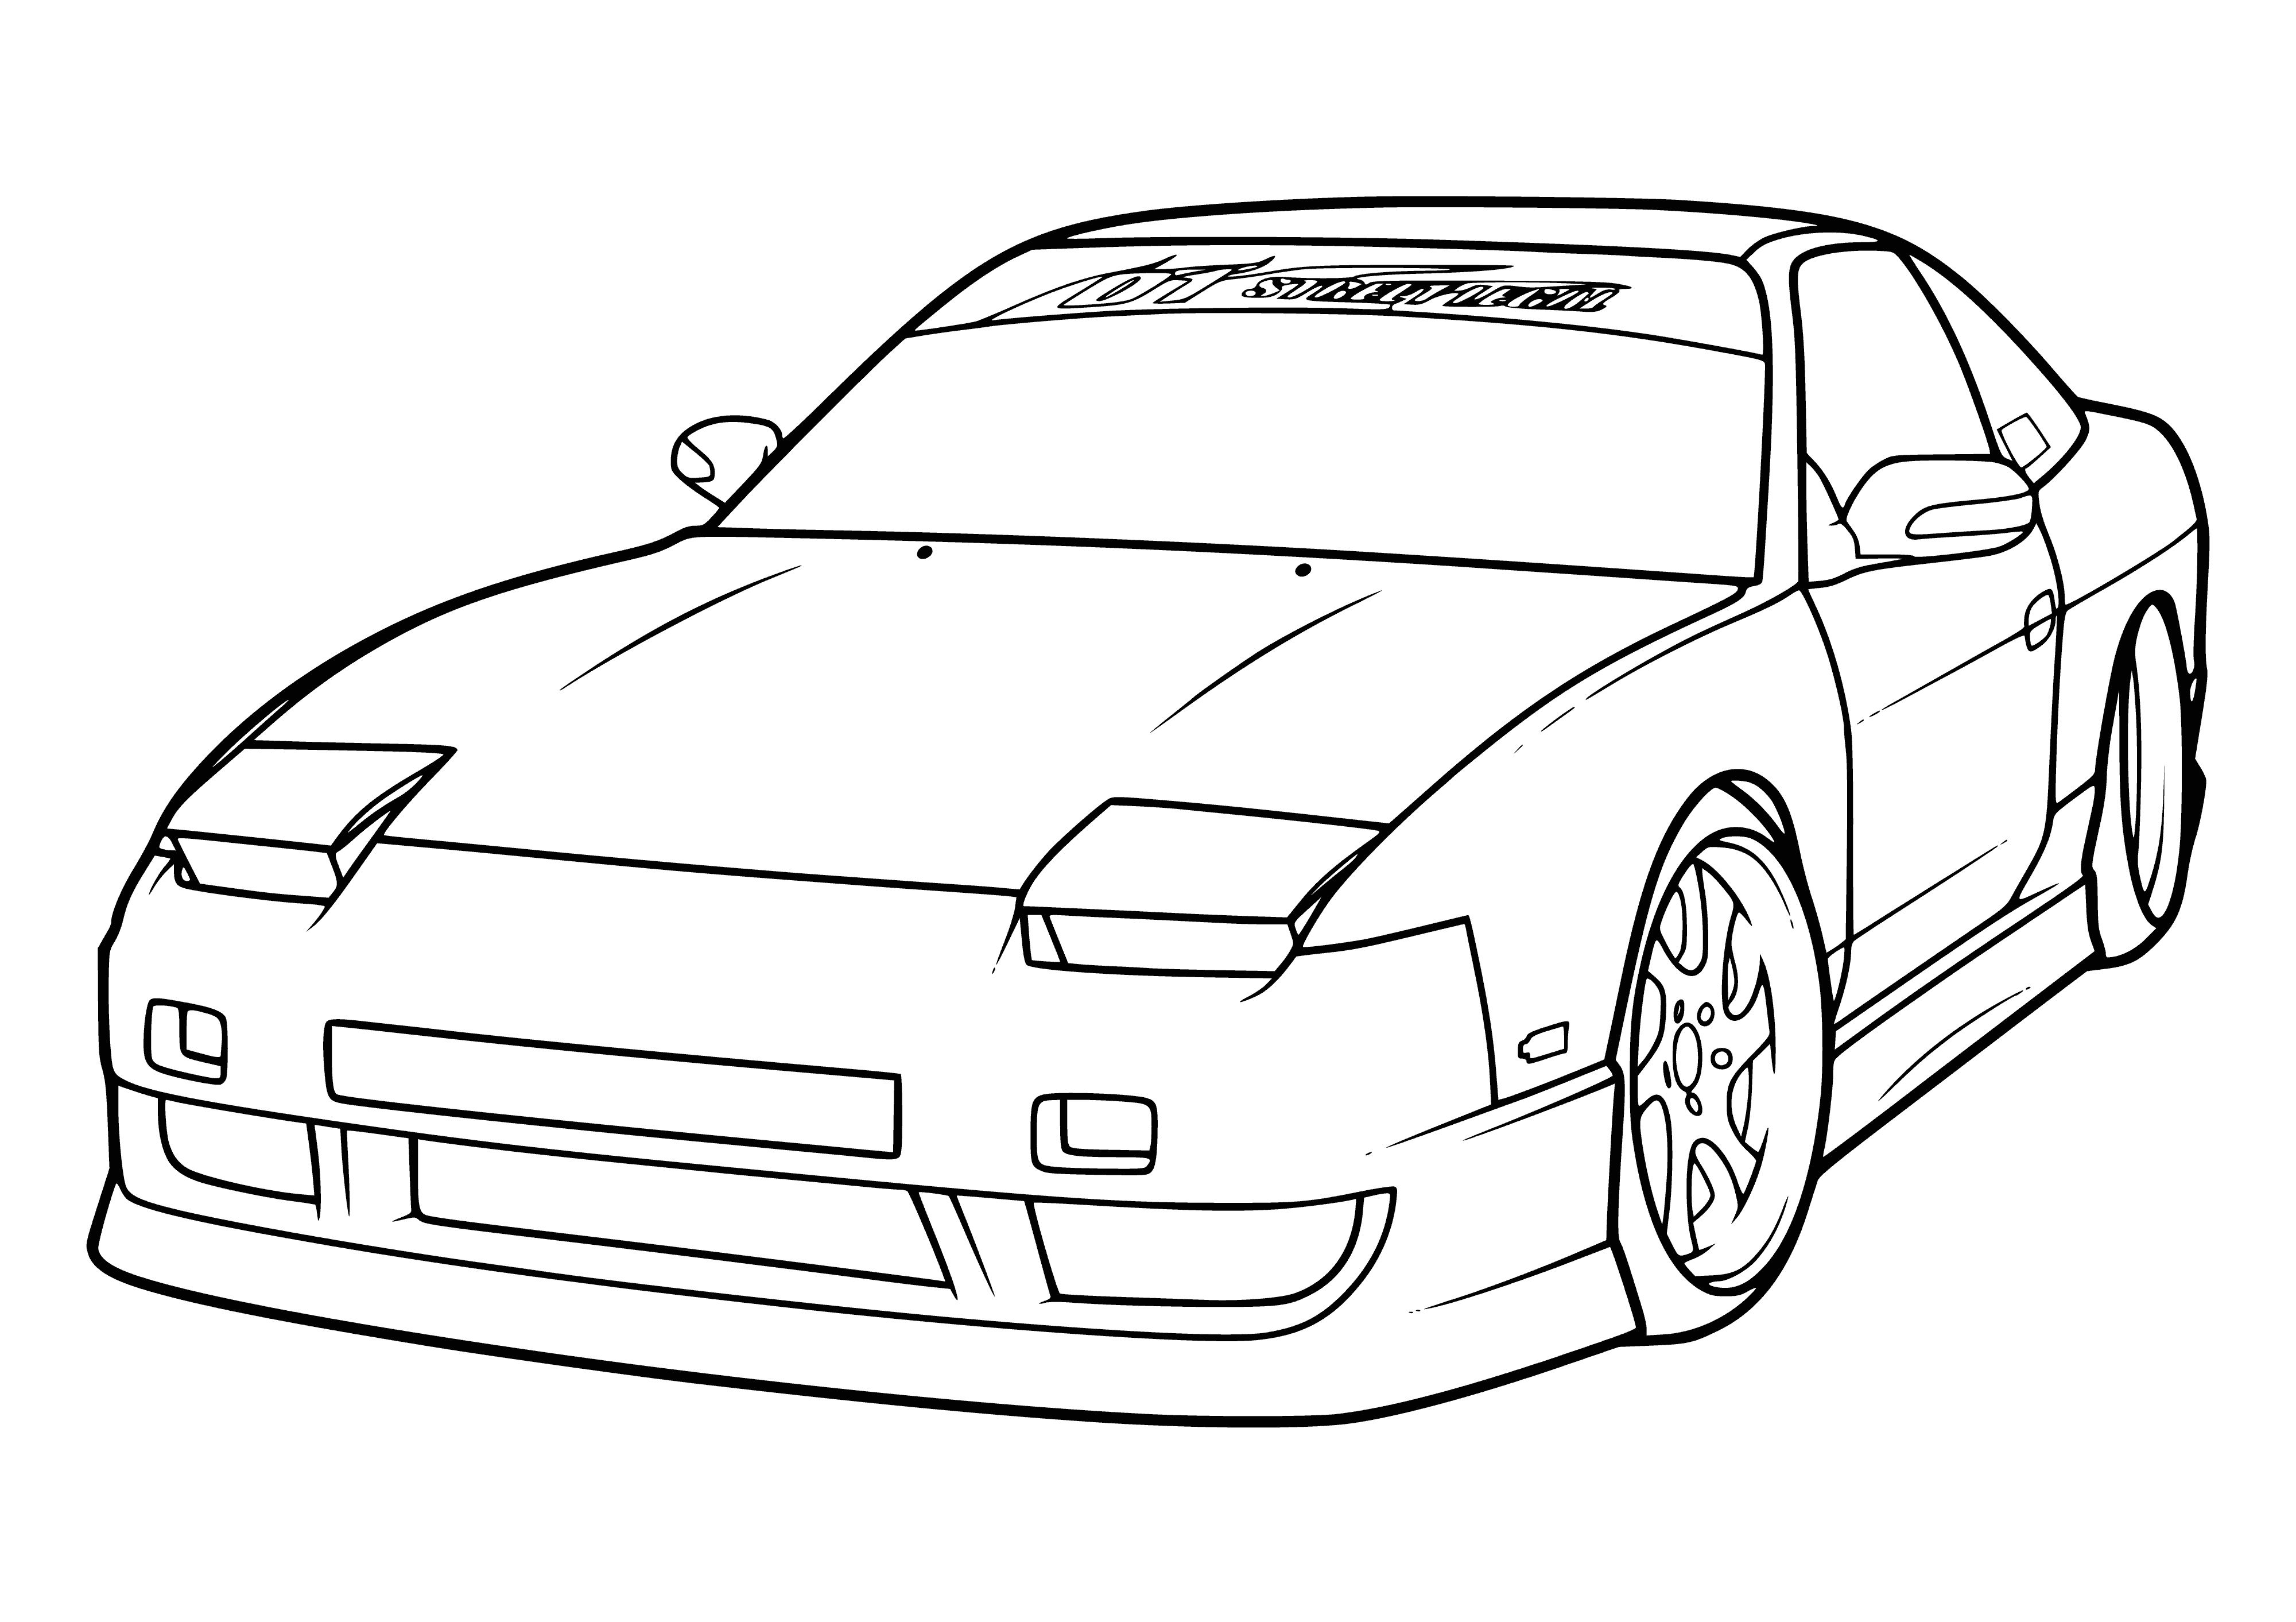 coloring page: A red car with 4 doors and a trunk, 5 seats (bucket seats in front, bench in back) and a manual transmission.